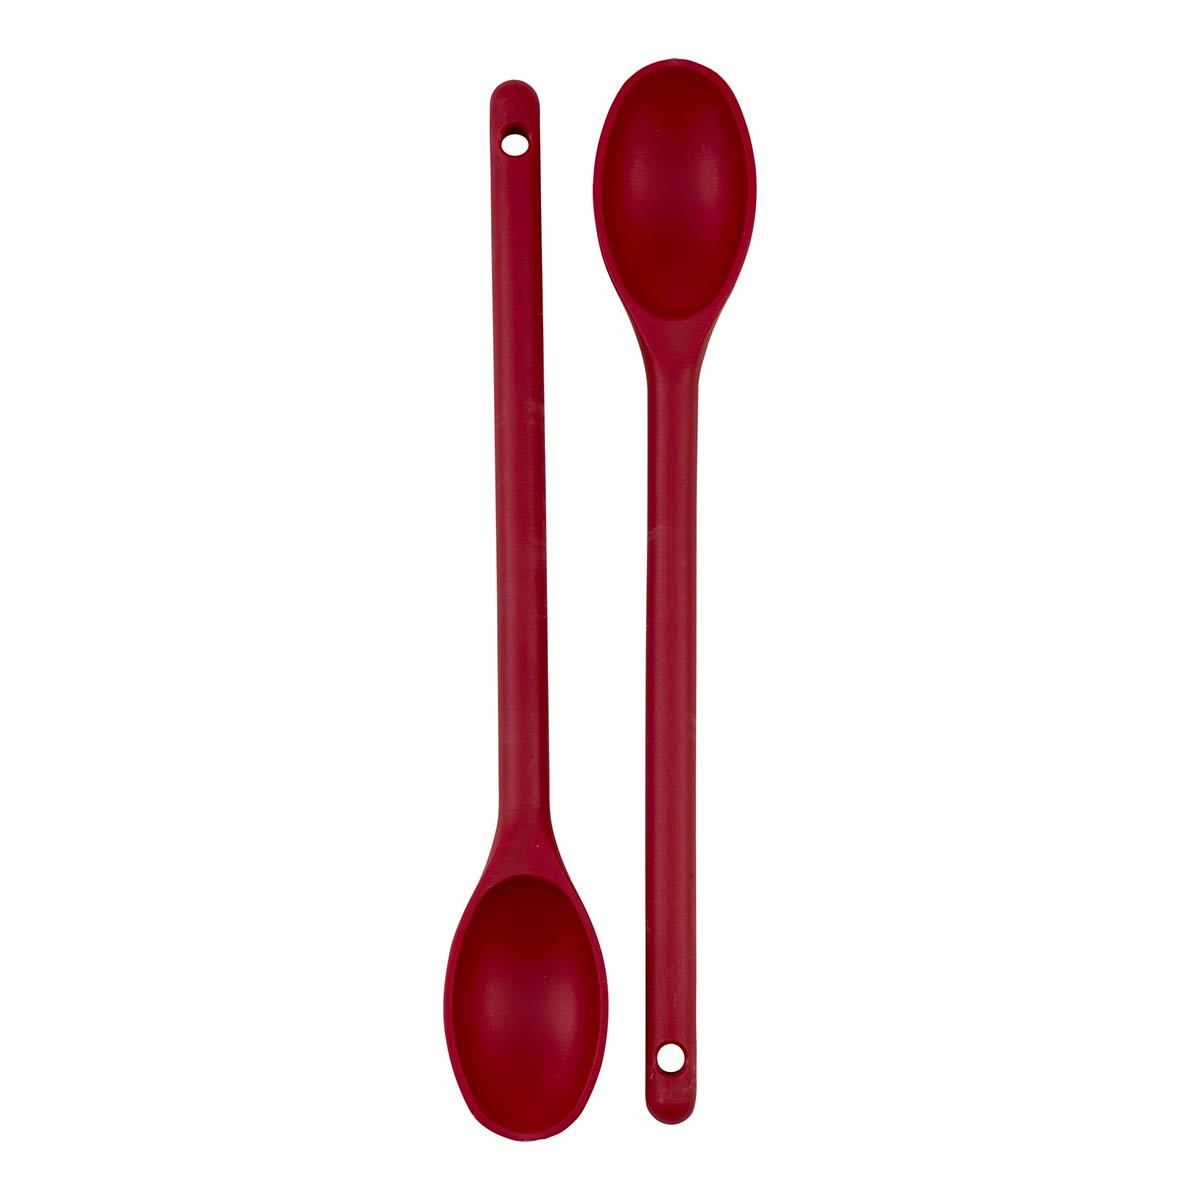 https://www.goodcook.com/media/catalog/product/e/v/everyday-mixing-spoons-multi-pack-angle.jpg?auto=webp&format=pjpg